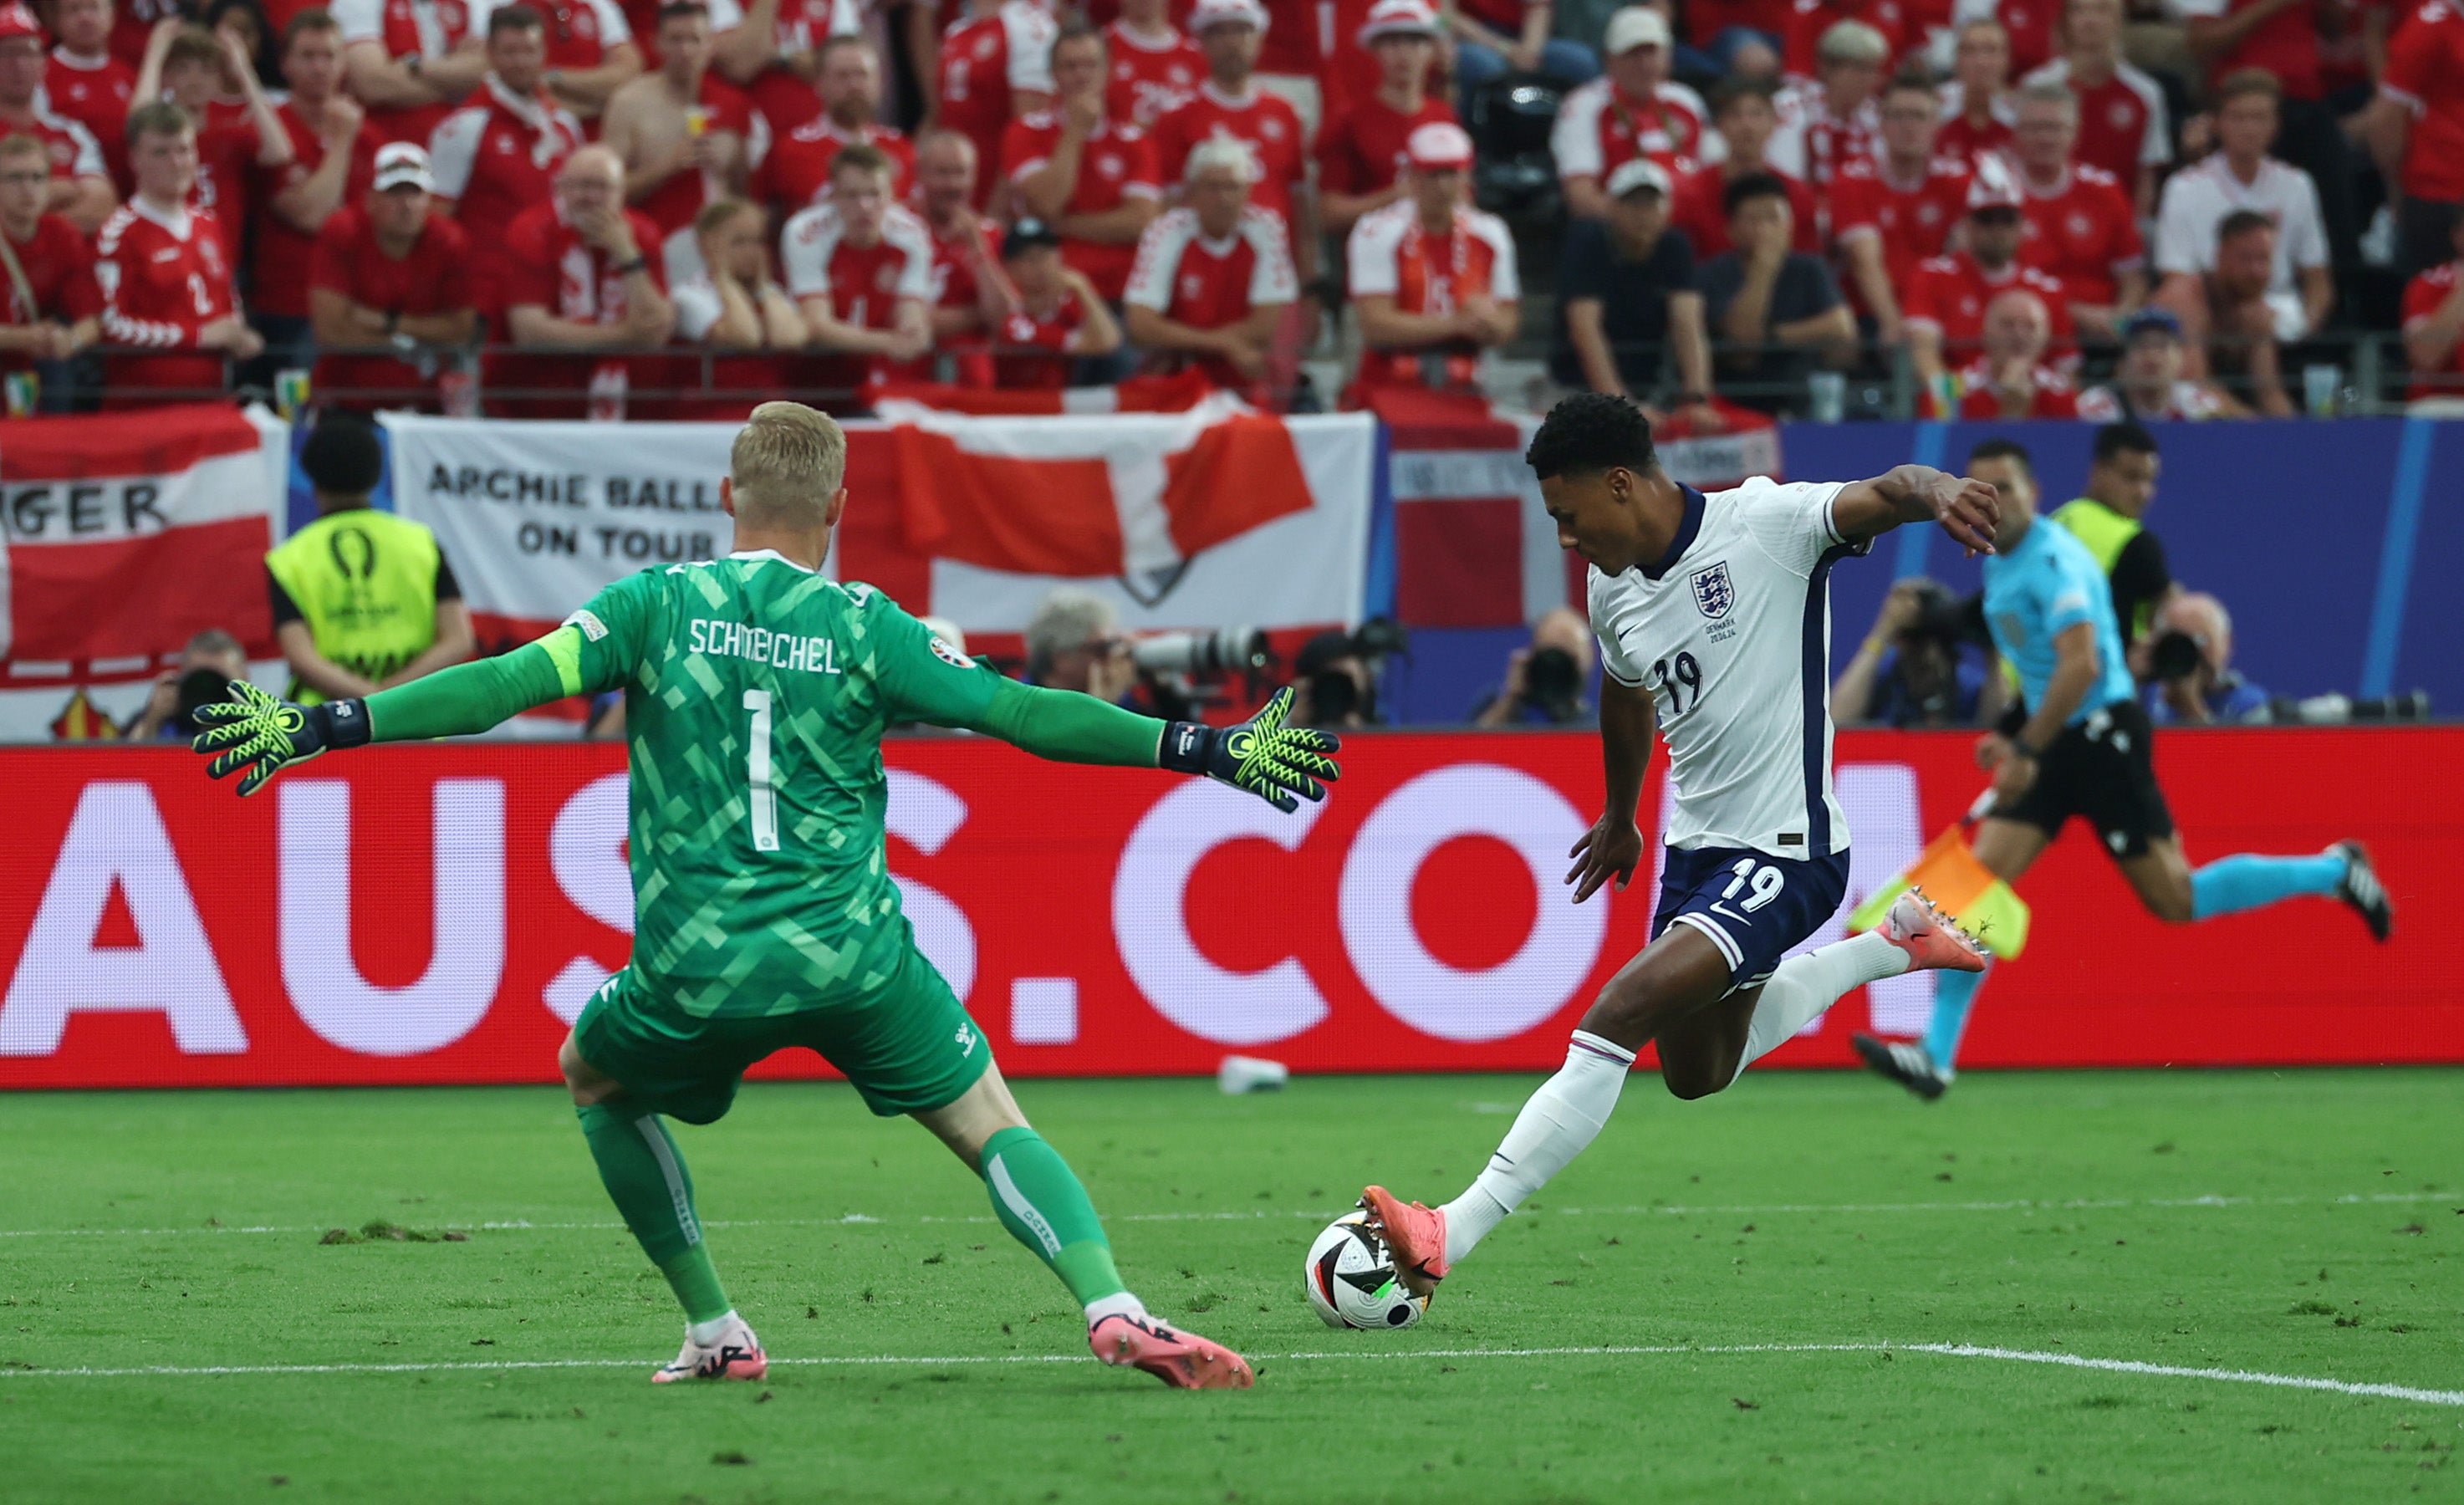 Ollie Watkins made an impact when he came on and had a good shot saved by Kasper Schmeichel